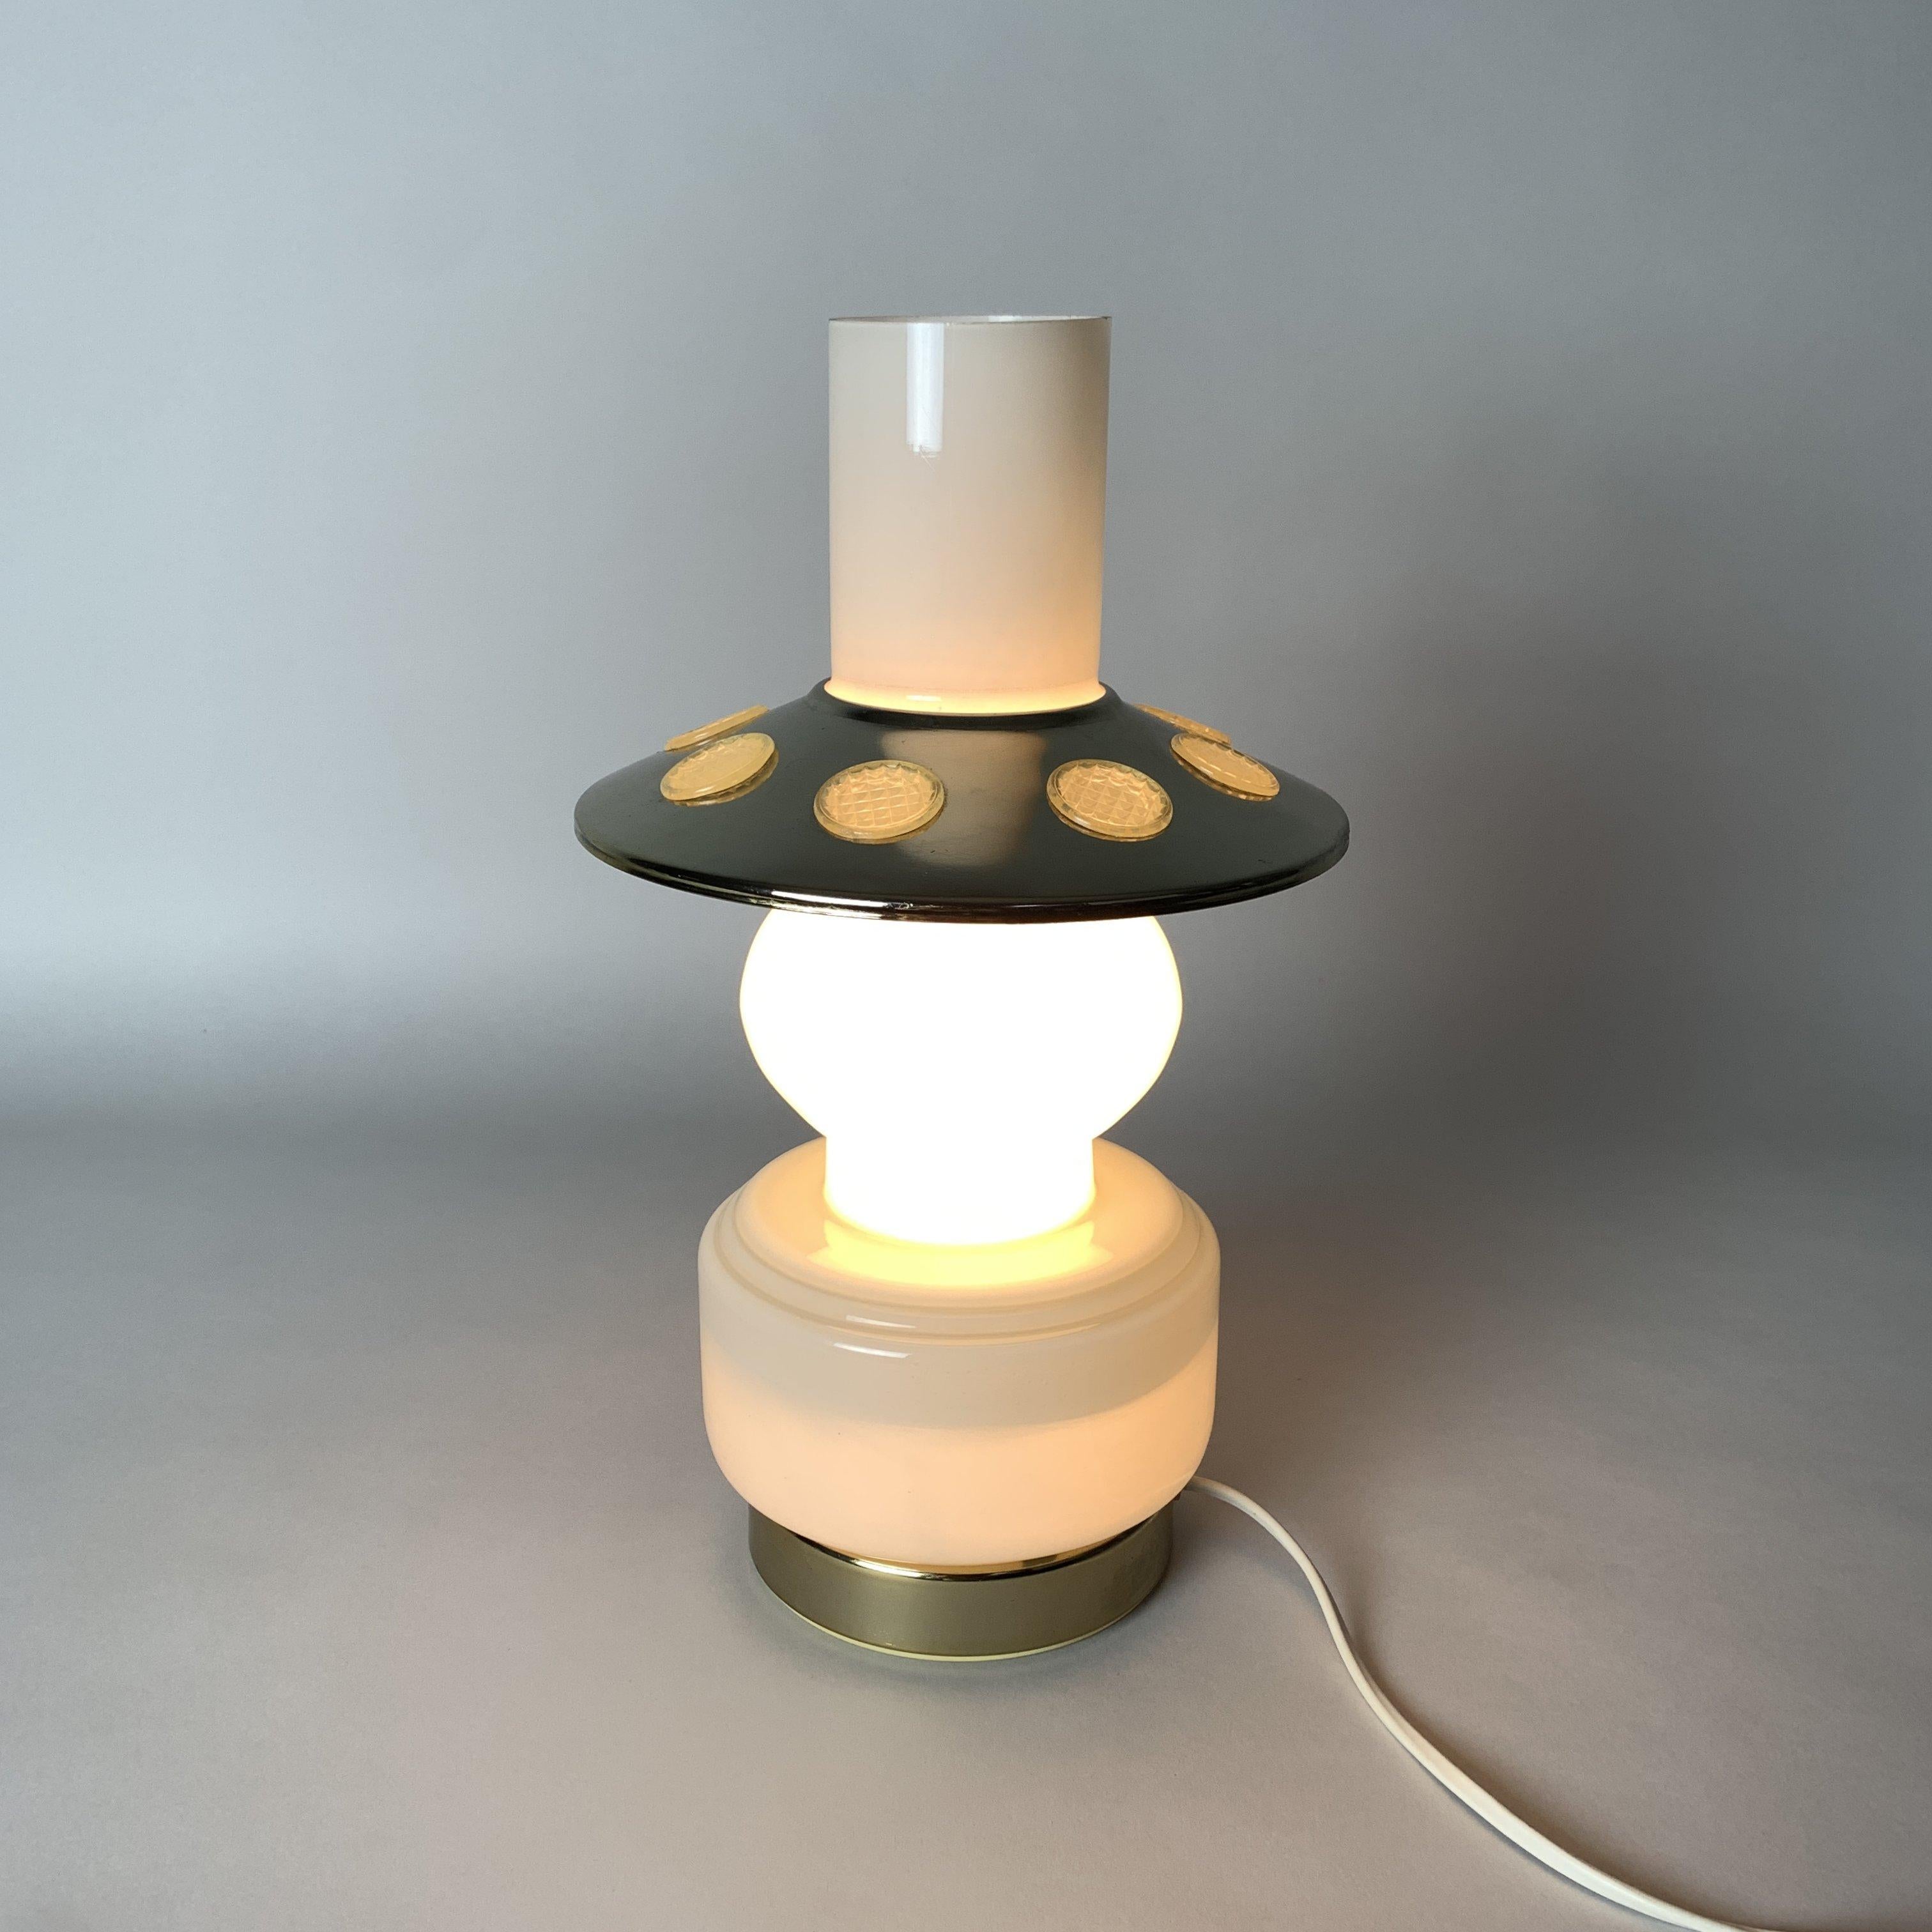 Czech Mid-Century Opal Glass & Brass Plated Table Lamp, 1960's For Sale